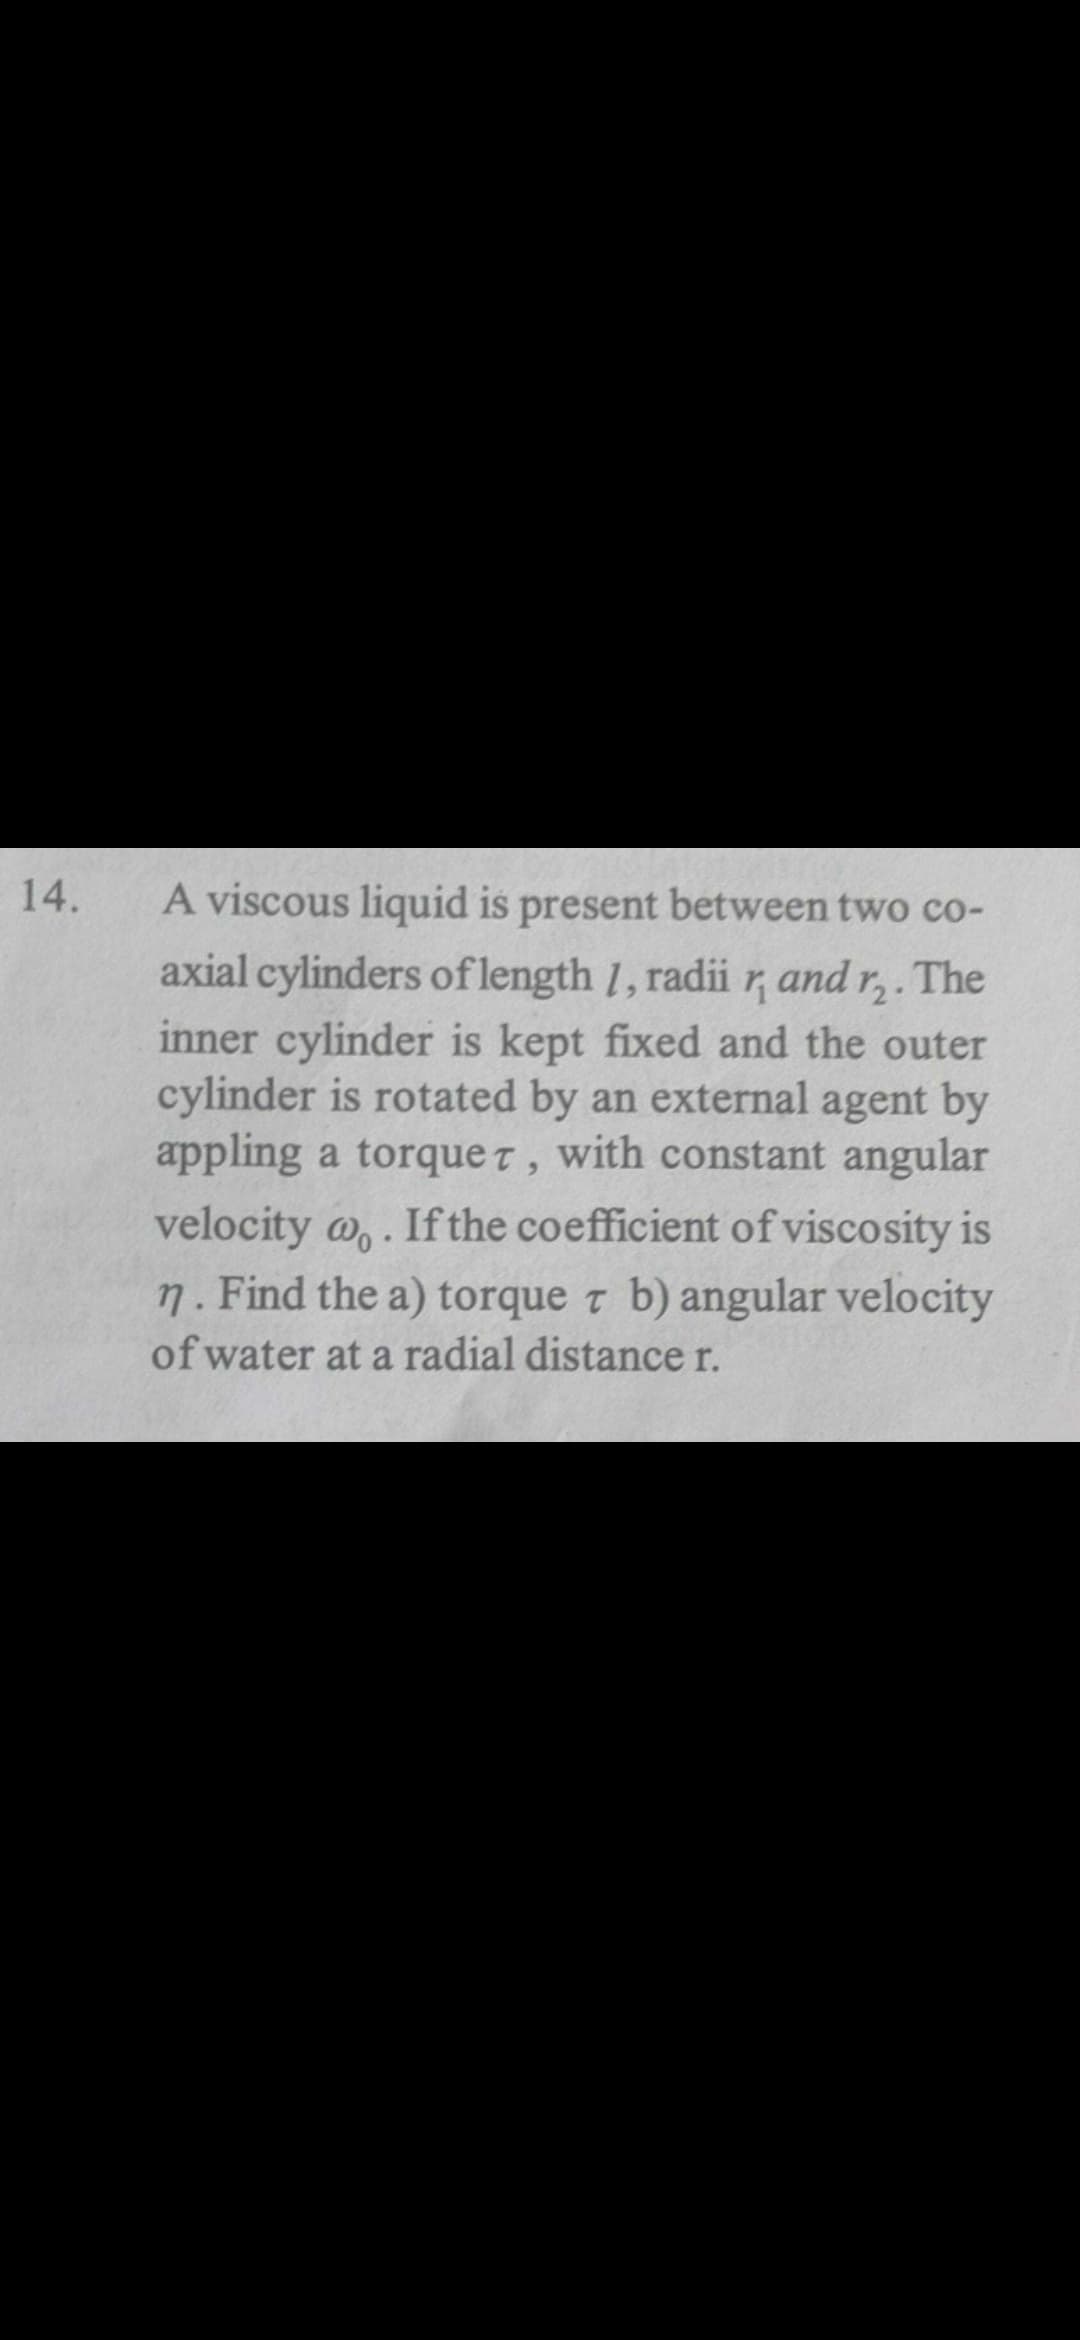 14.
A viscous liquid is present between two co-
axial cylinders oflength 1, radii r, and r,. The
inner cylinder is kept fixed and the outer
cylinder is rotated by an external agent by
appling a torque t, with constant angular
velocity o,.
7. Find the a) torque z b) angular velocity
of water at a radial distance r.
If the coefficient of viscosity is
